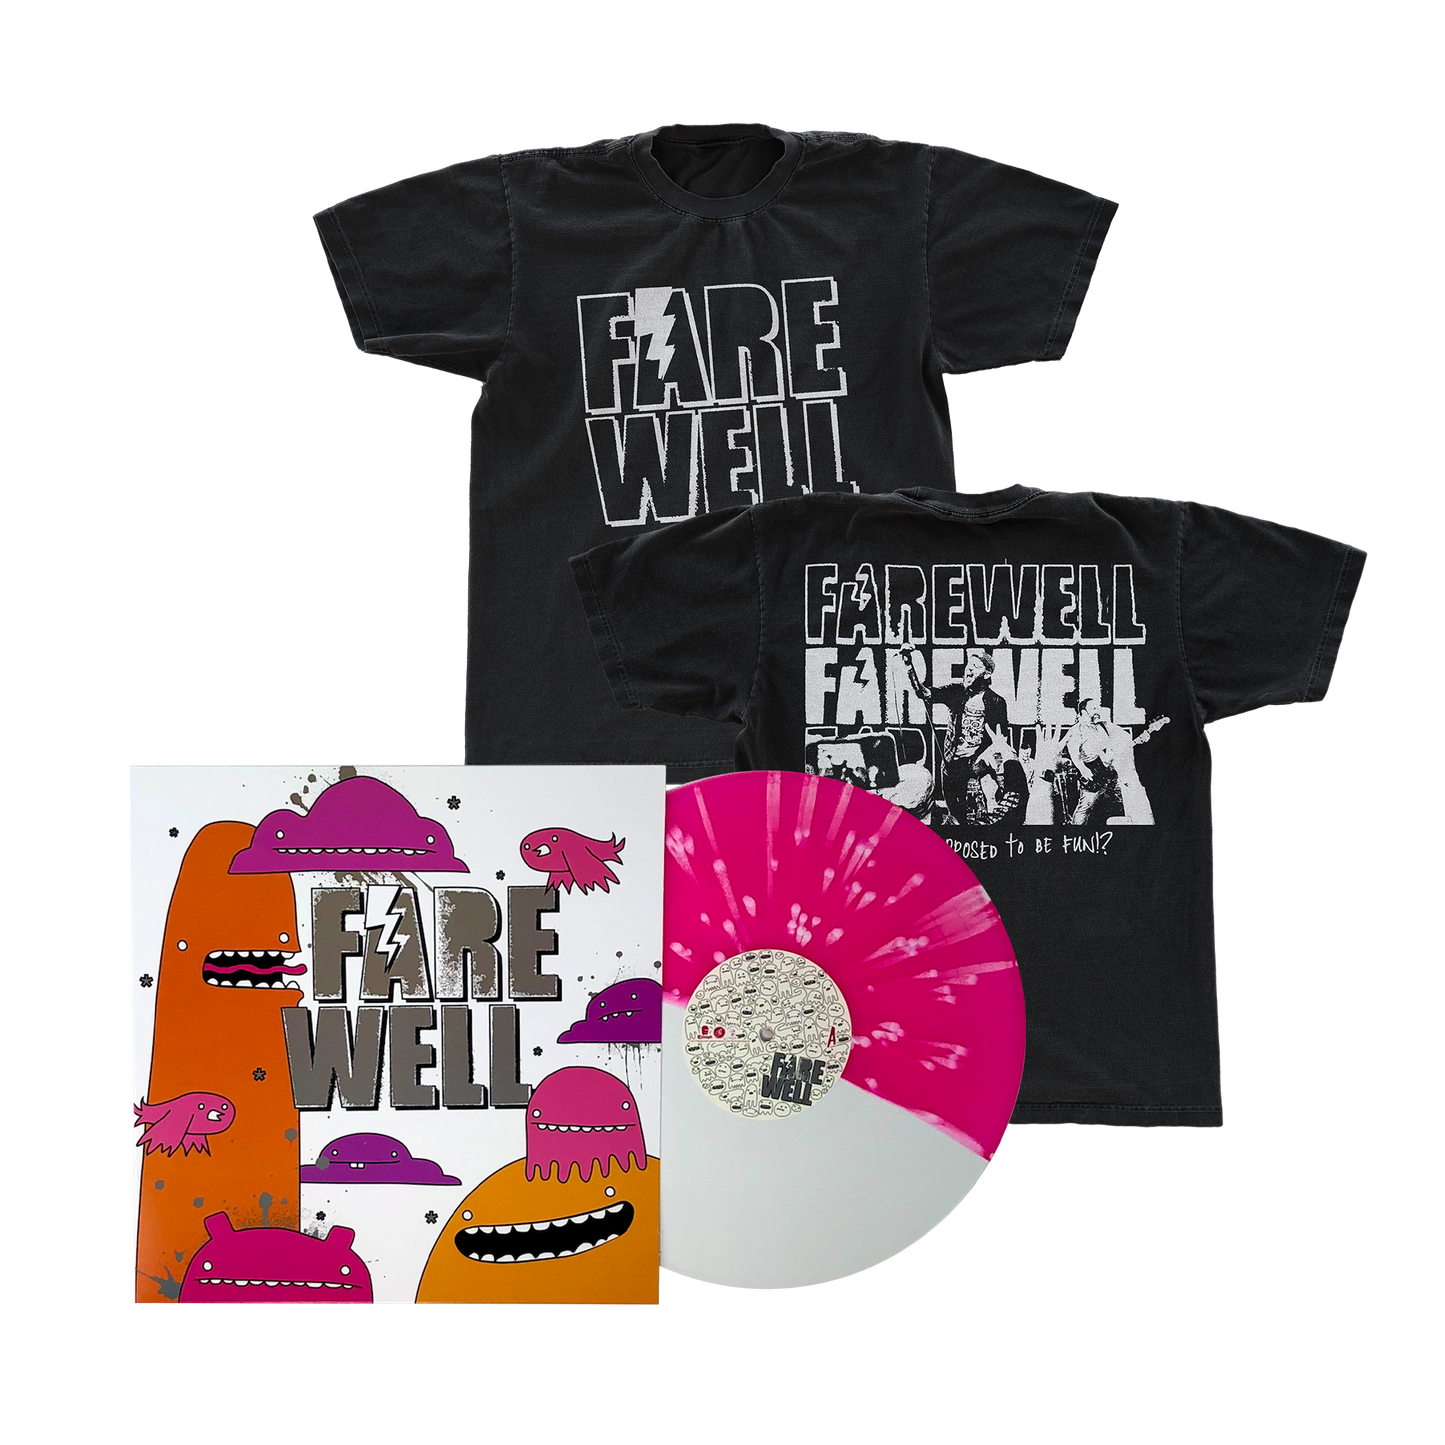 Farewell - "Isn't This Supposed To Be Fun" Vinyl & T-Shirt Bundle